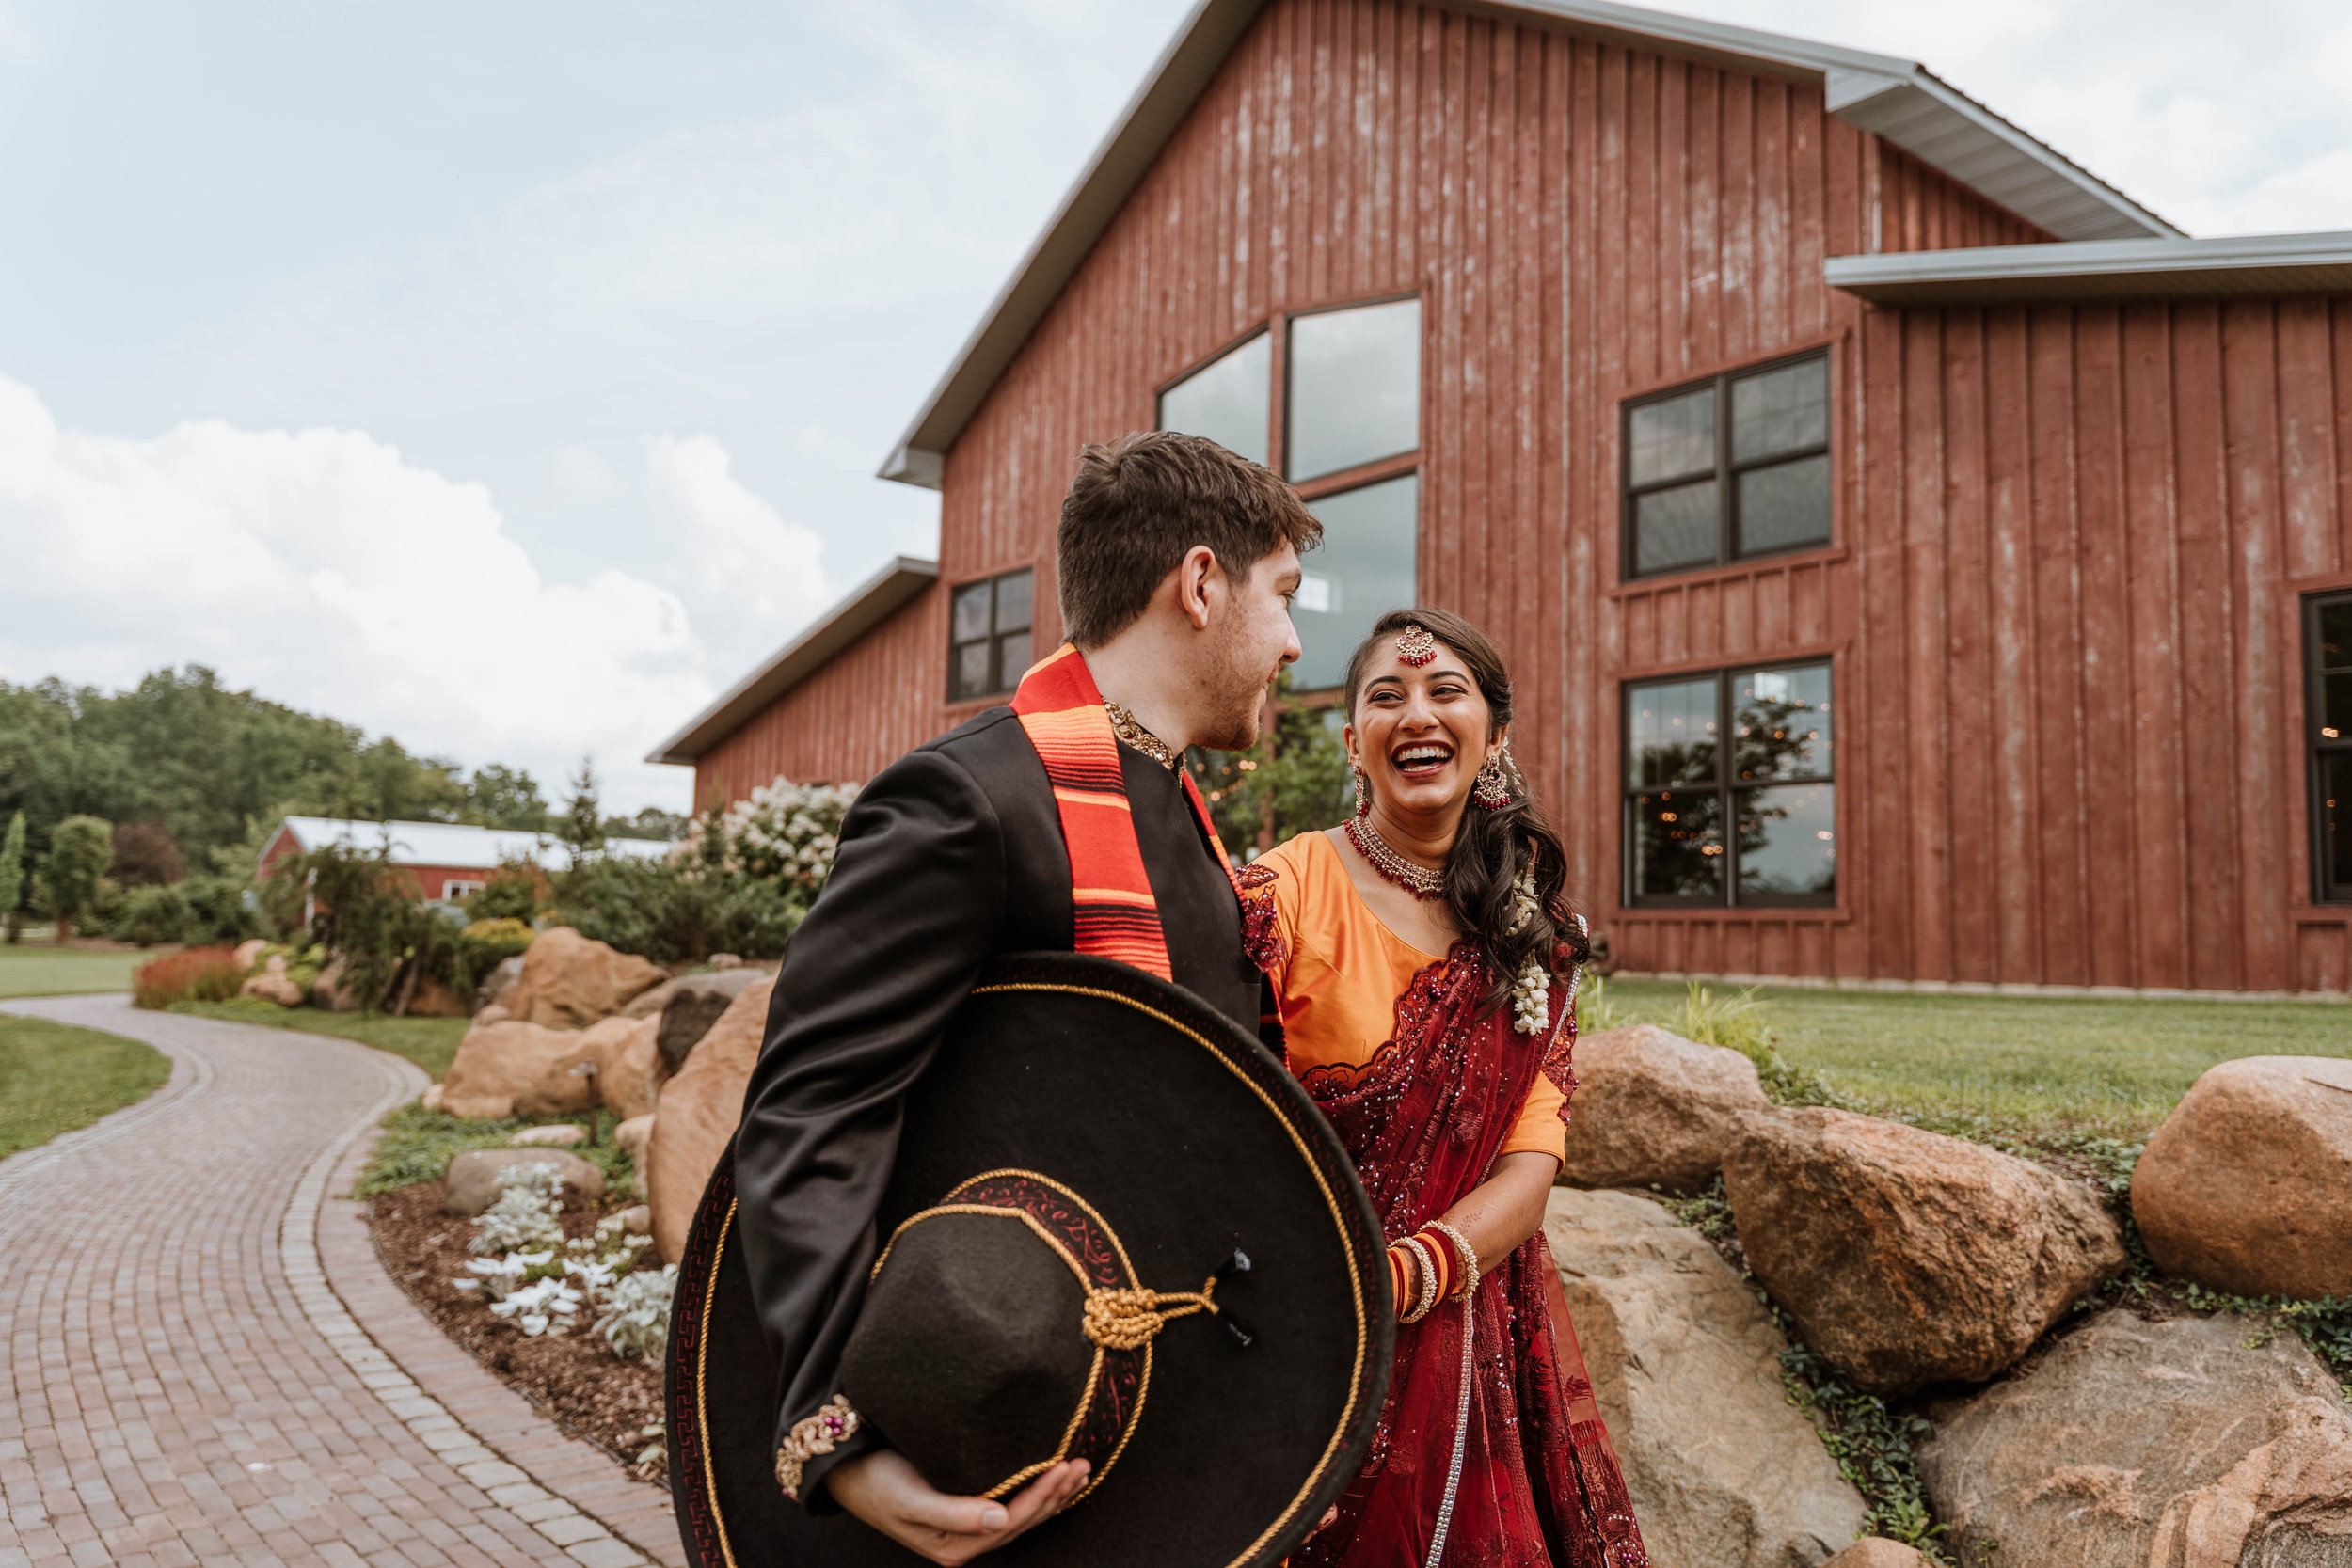 Multi-cultural wedding at Hornbakers Gardens Illinois